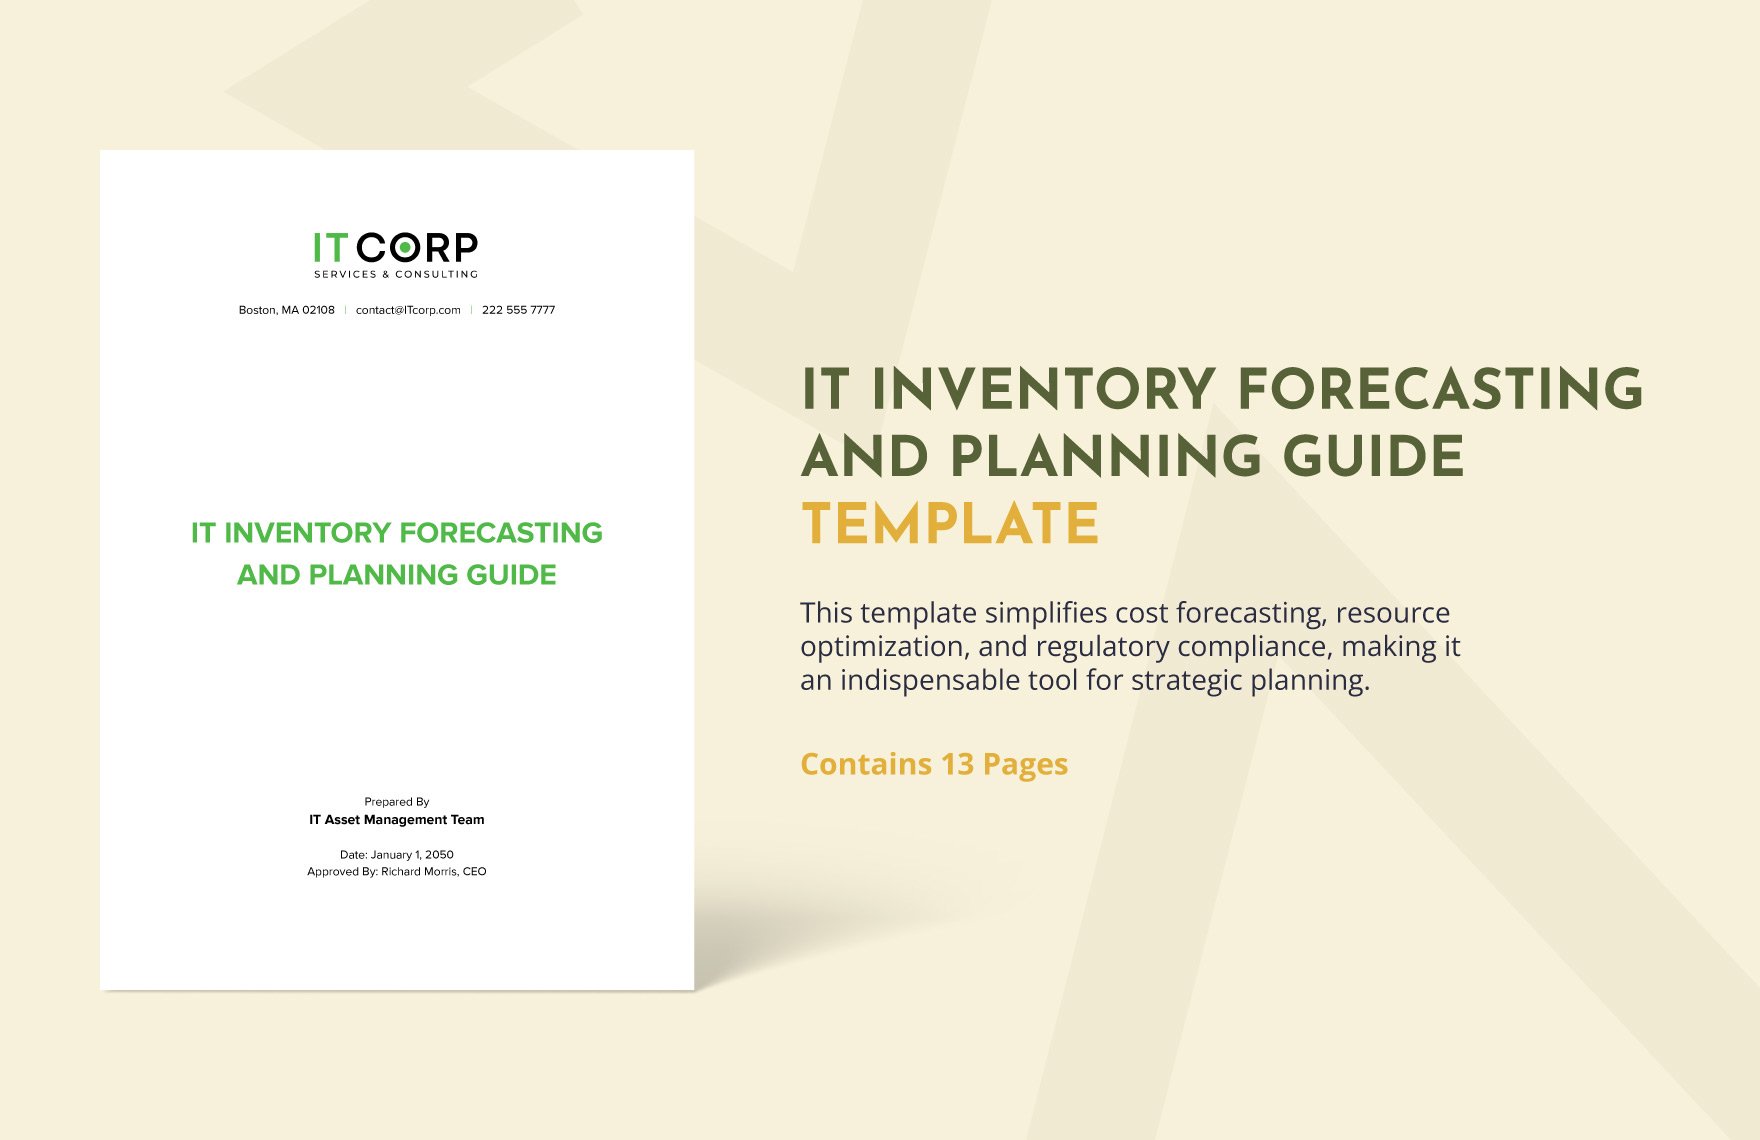 IT Inventory Forecasting and Planning Guide Template